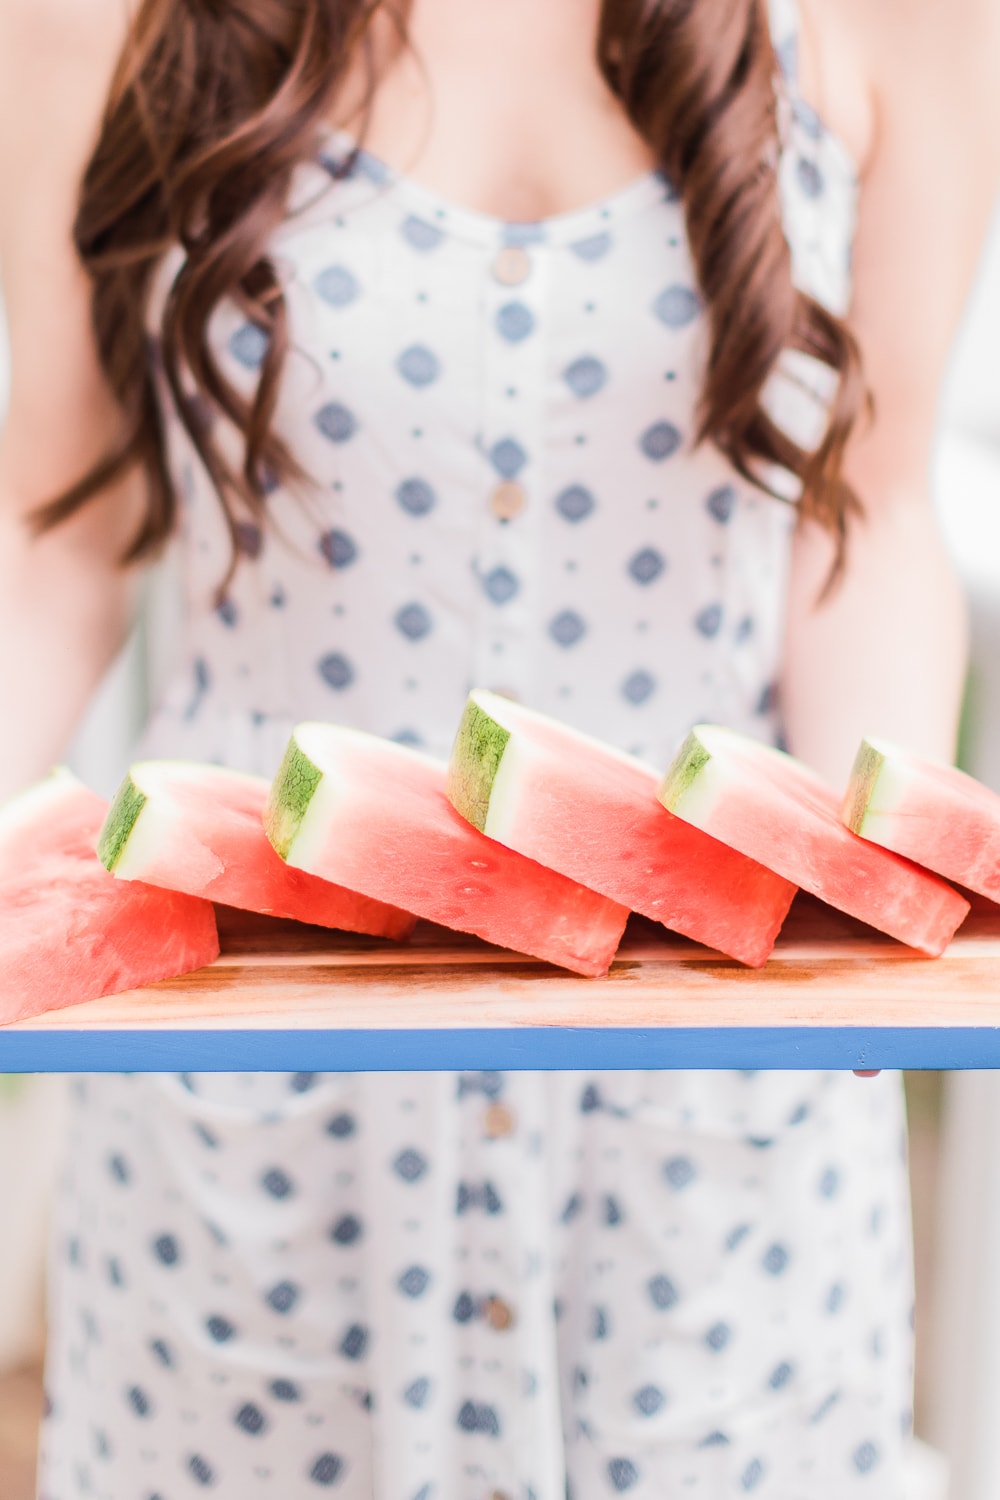 Lifestyle blogger Stephanie Ziajka shares a best of May 2020 roundup, where she shares the top 10 things she found during the month of May 2020, on Diary of a Debutante, girl holding watermelon tray